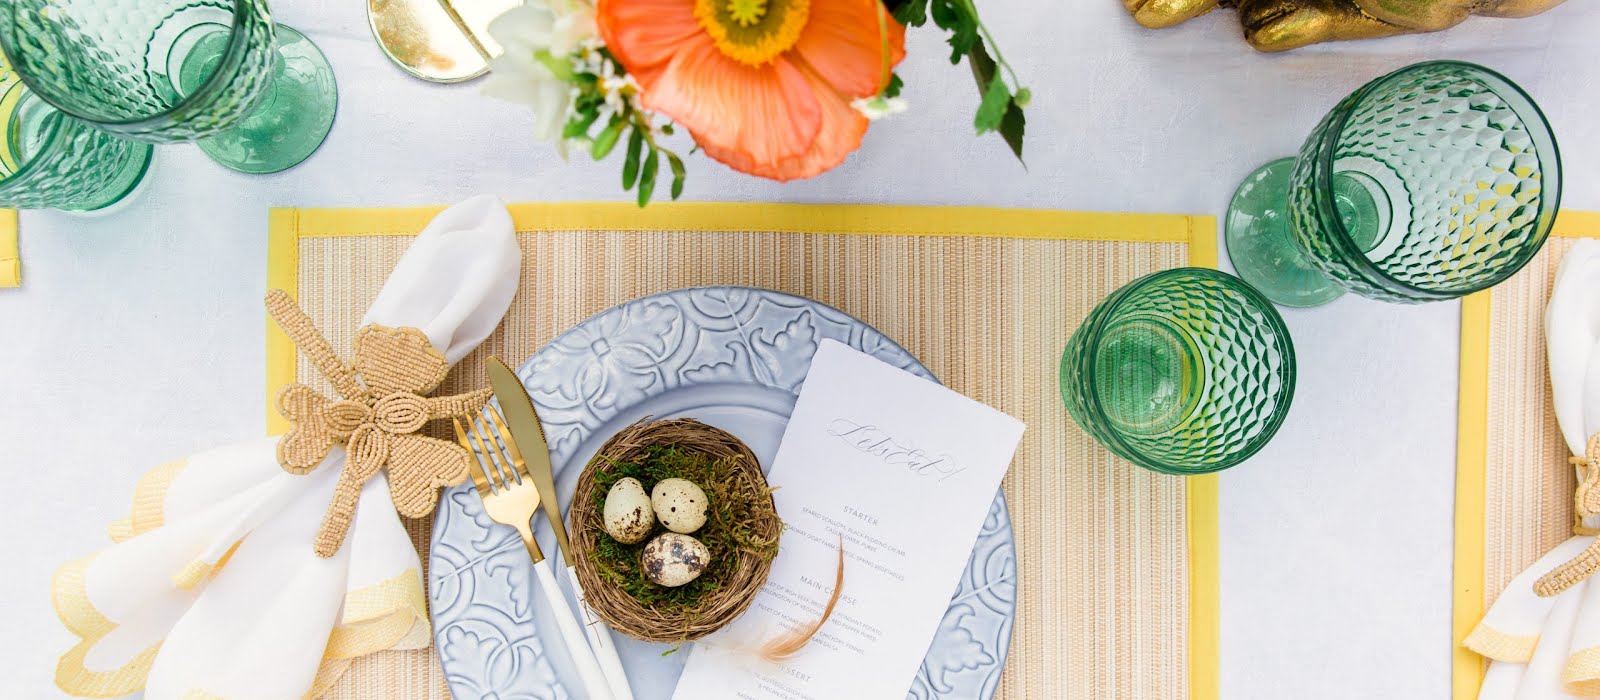 Tara O’Connor of The Designed Table shares her tips for the perfect Easter table